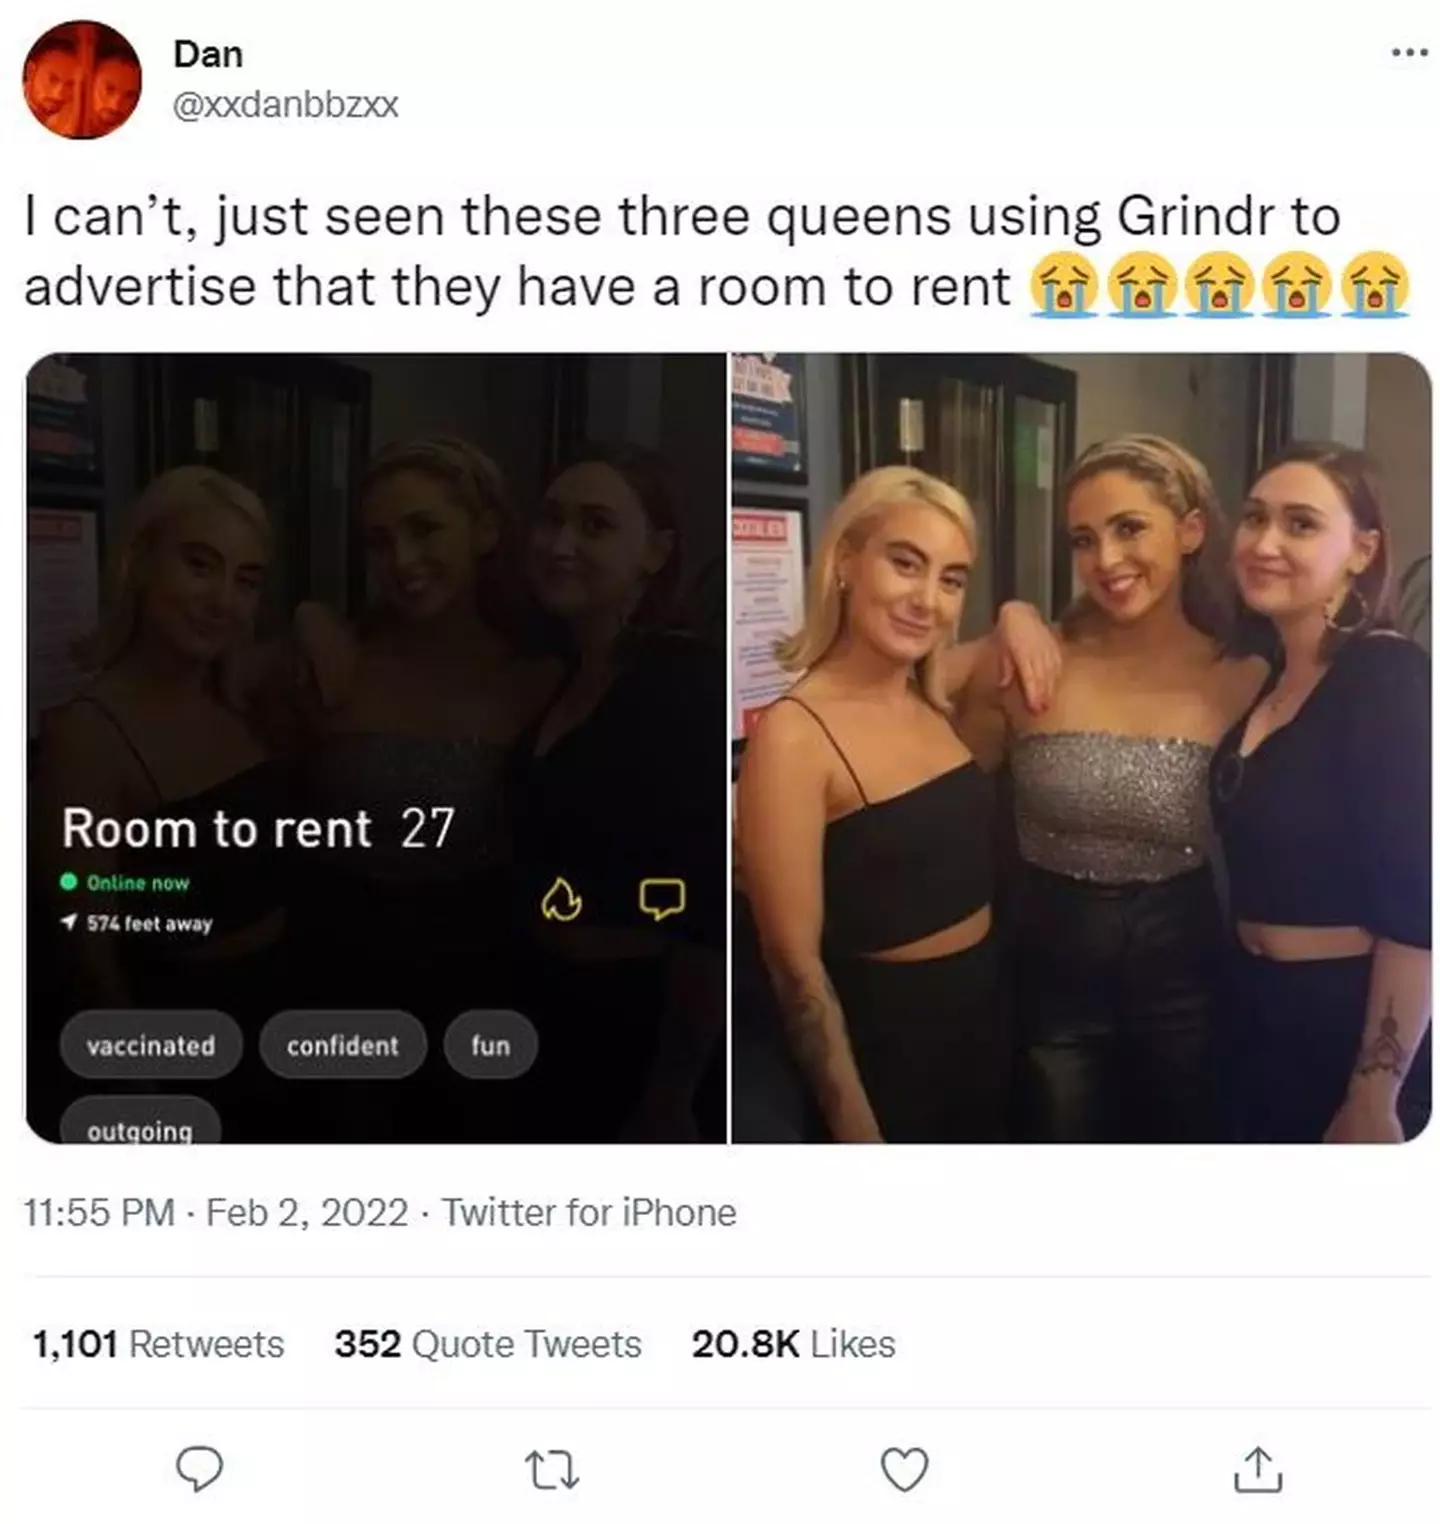 The women have been described as 'geniuses' for their Grindr ad. (Kennedy News)